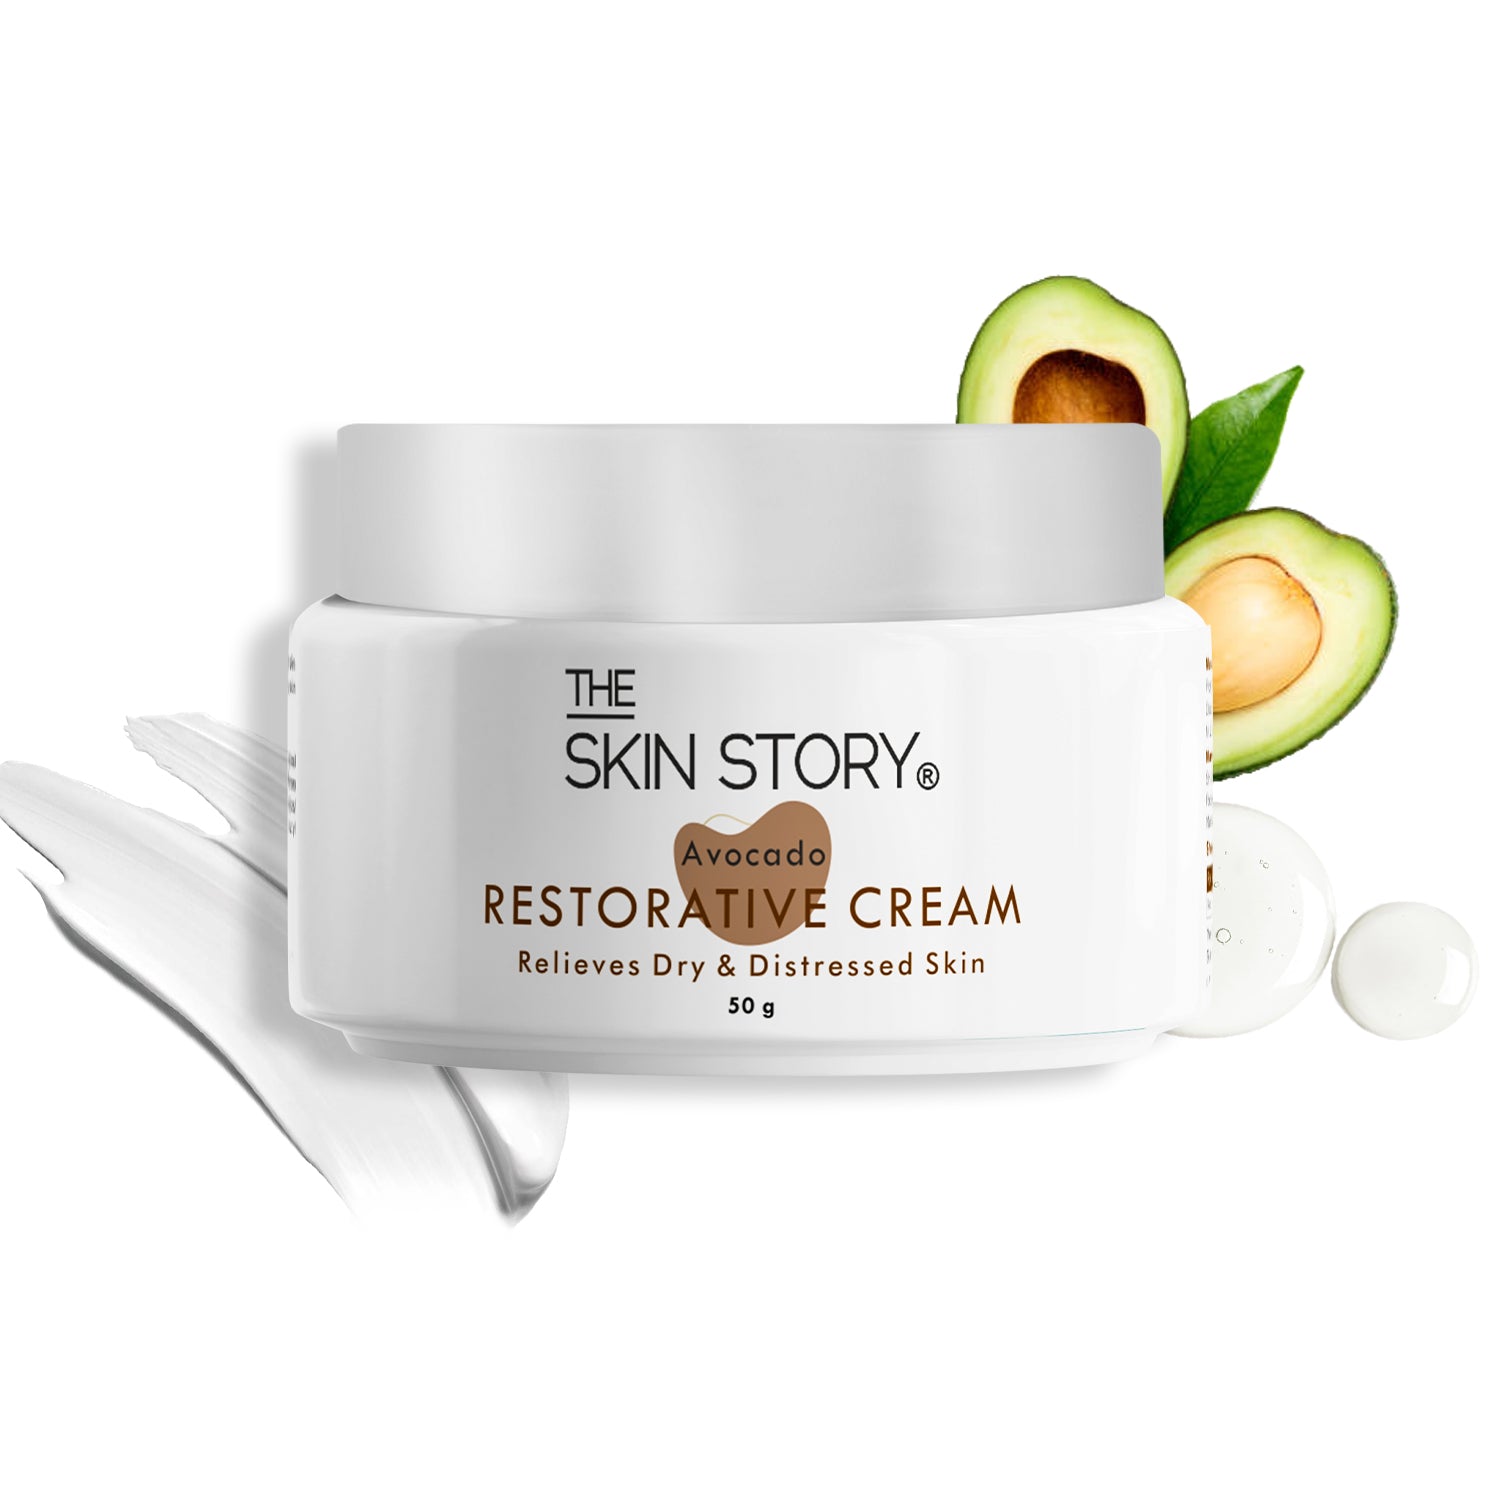 The Skin Story Moisturising Cream for Winters | Winter Care | Cream for Dry and Rough Skin | Enriched with Argan Oil | 50g